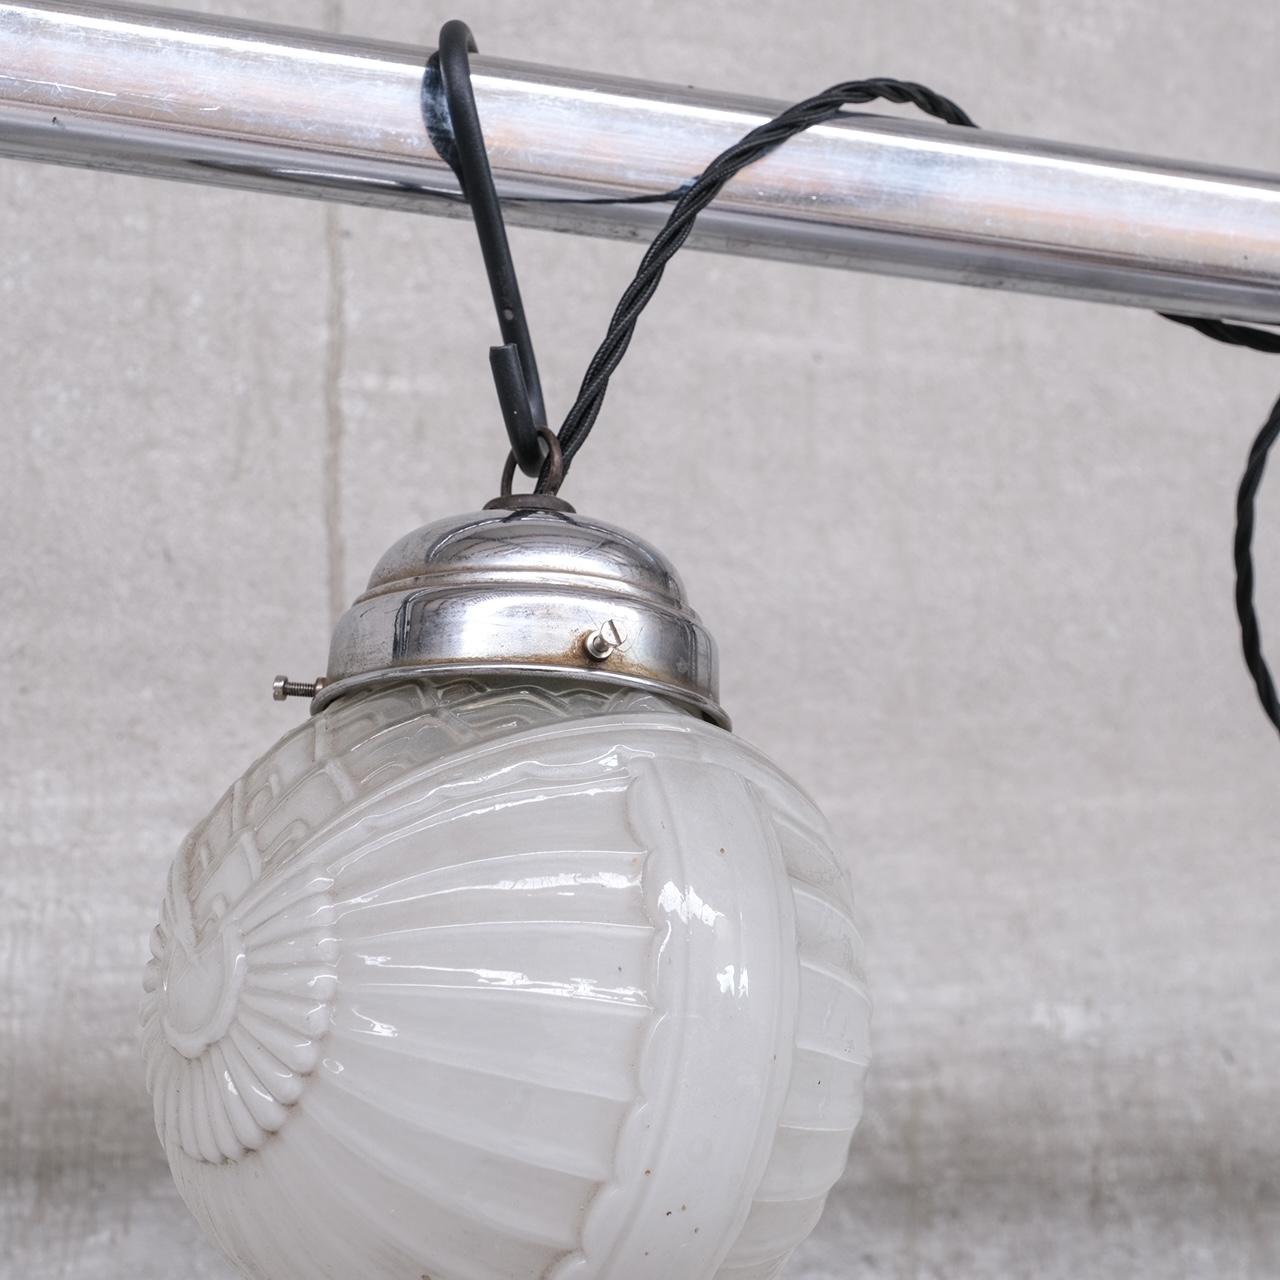 A pair of deco diminutive pendant lights.

France, c1930s.

Metal and opaque glass.

Price is for the pair.

No chain or rose available but these are sourced easily online.

Location: Belgium Gallery.

Dimensions: 20 H x 15 Diameter in